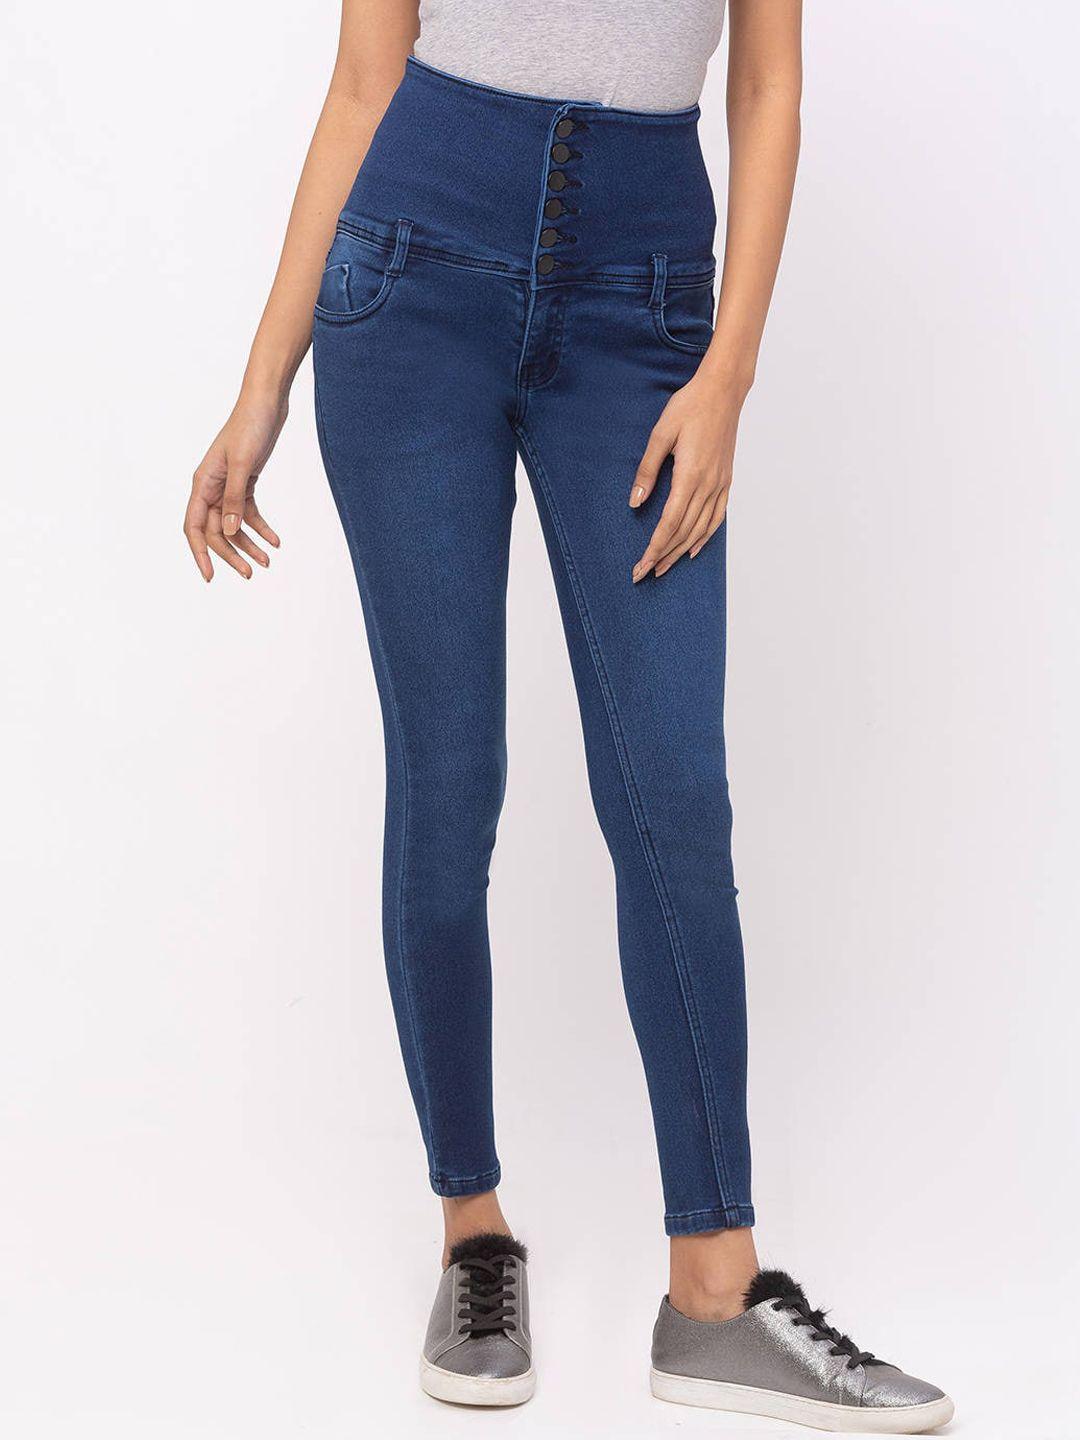 zola-women-blue-slim-fit-high-rise-stretchable-jeans